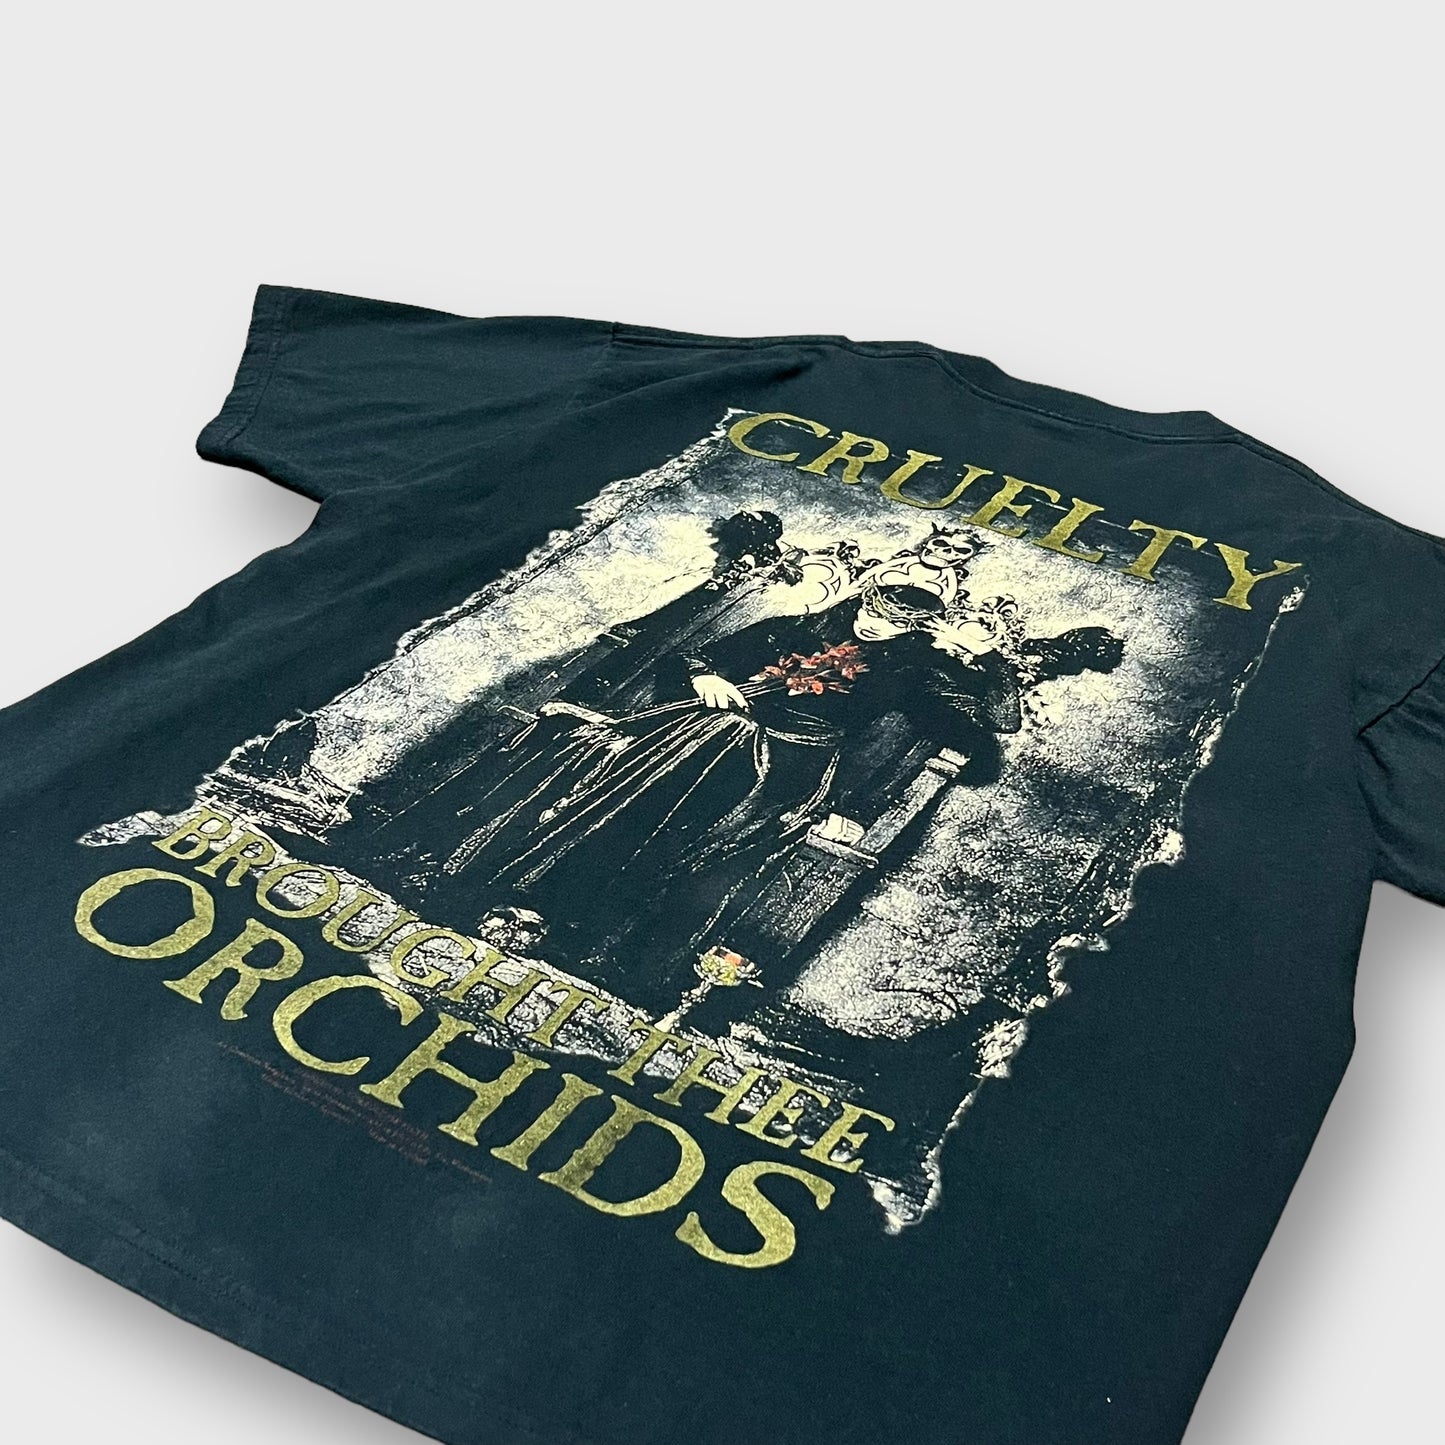 1998 Cradle of Filth
“Cruelty And The Best”           album t-shirt